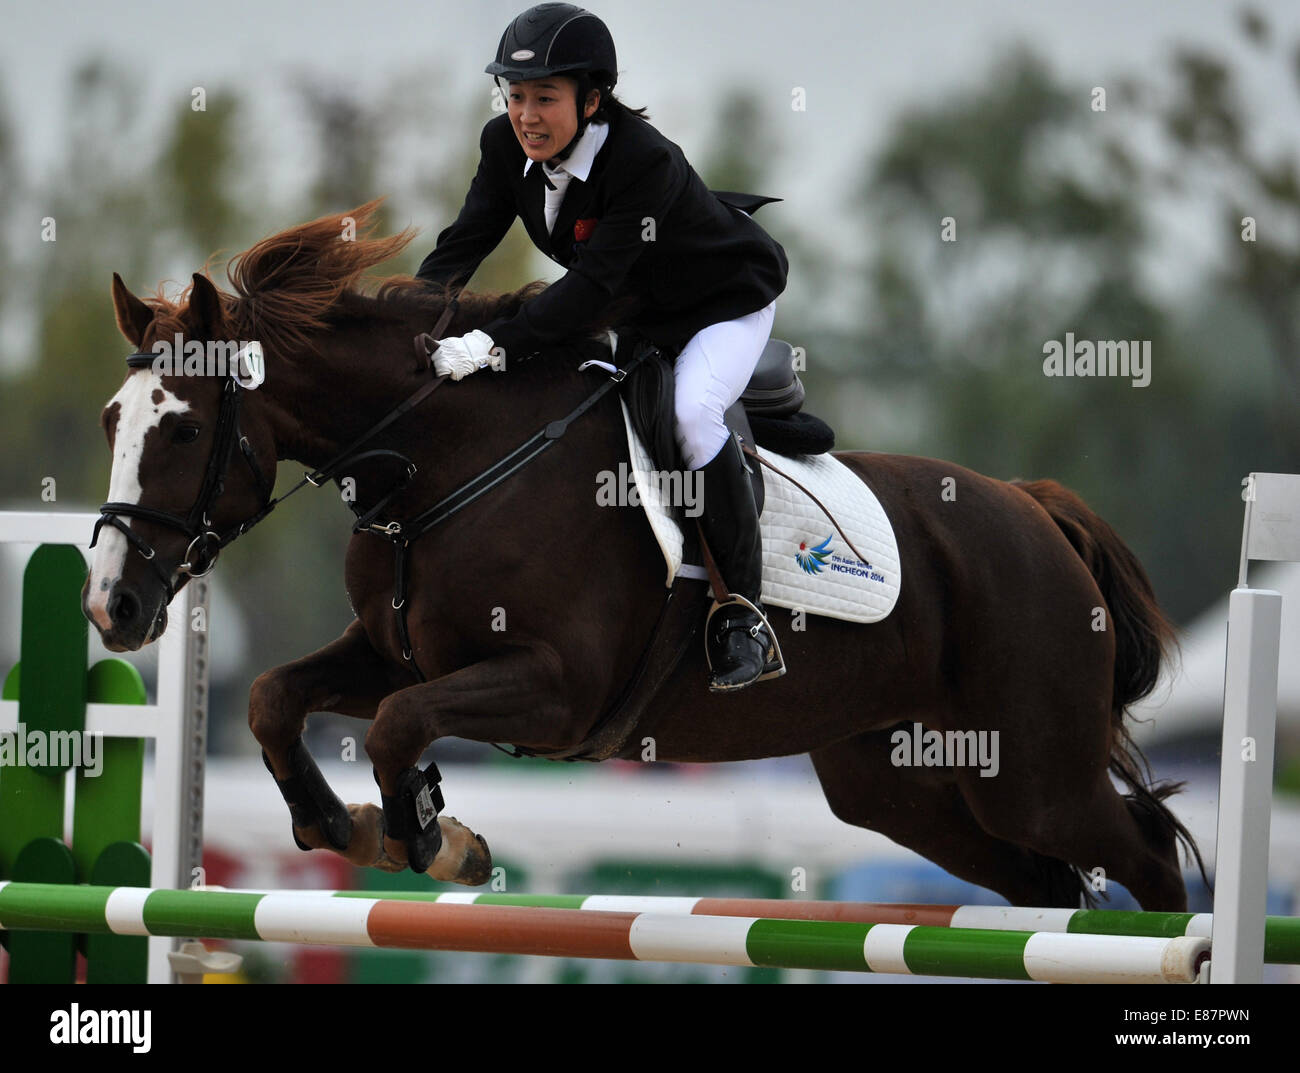 (141002) -- INCHEON, Oct. 2, 2014 (Xinhua) -- Chen Qian of China competes during the women's individual riding match of modern pentathlon at the 17th Asian Games in Incheon, South Korea, Oct. 2, 2014. (Xinhua/Xie Haining)(mcg) Stock Photo